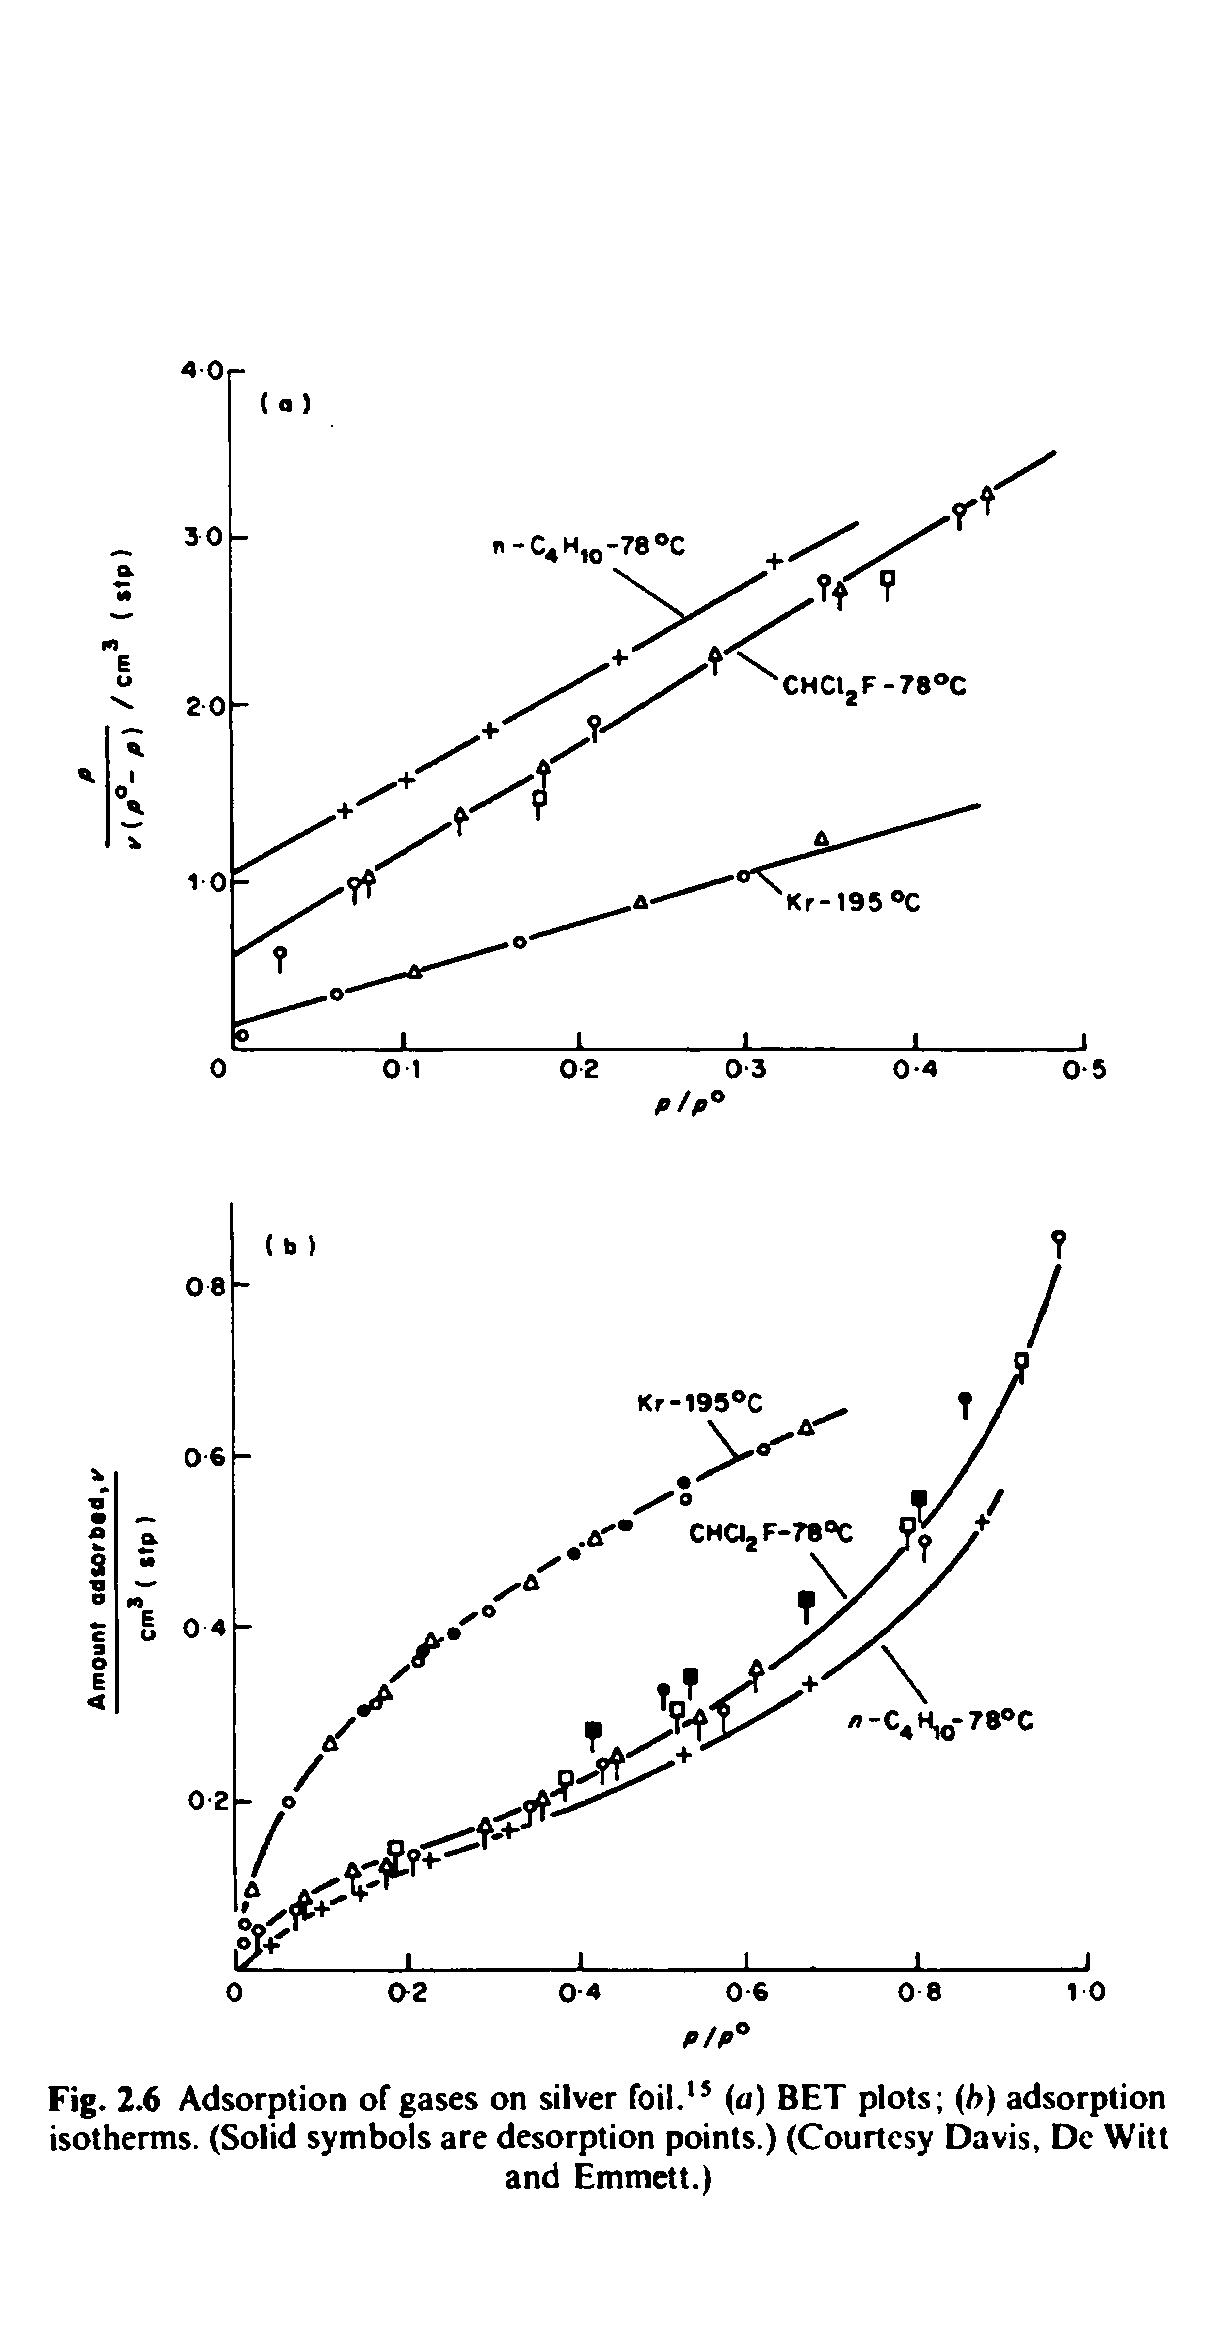 Fig. 2.6 Adsorption of gases on silver foil. (a) BET plots h) adsorption isotherms. (Solid symbols are desorption points.) (Courtesy Davis, Dc Witt...